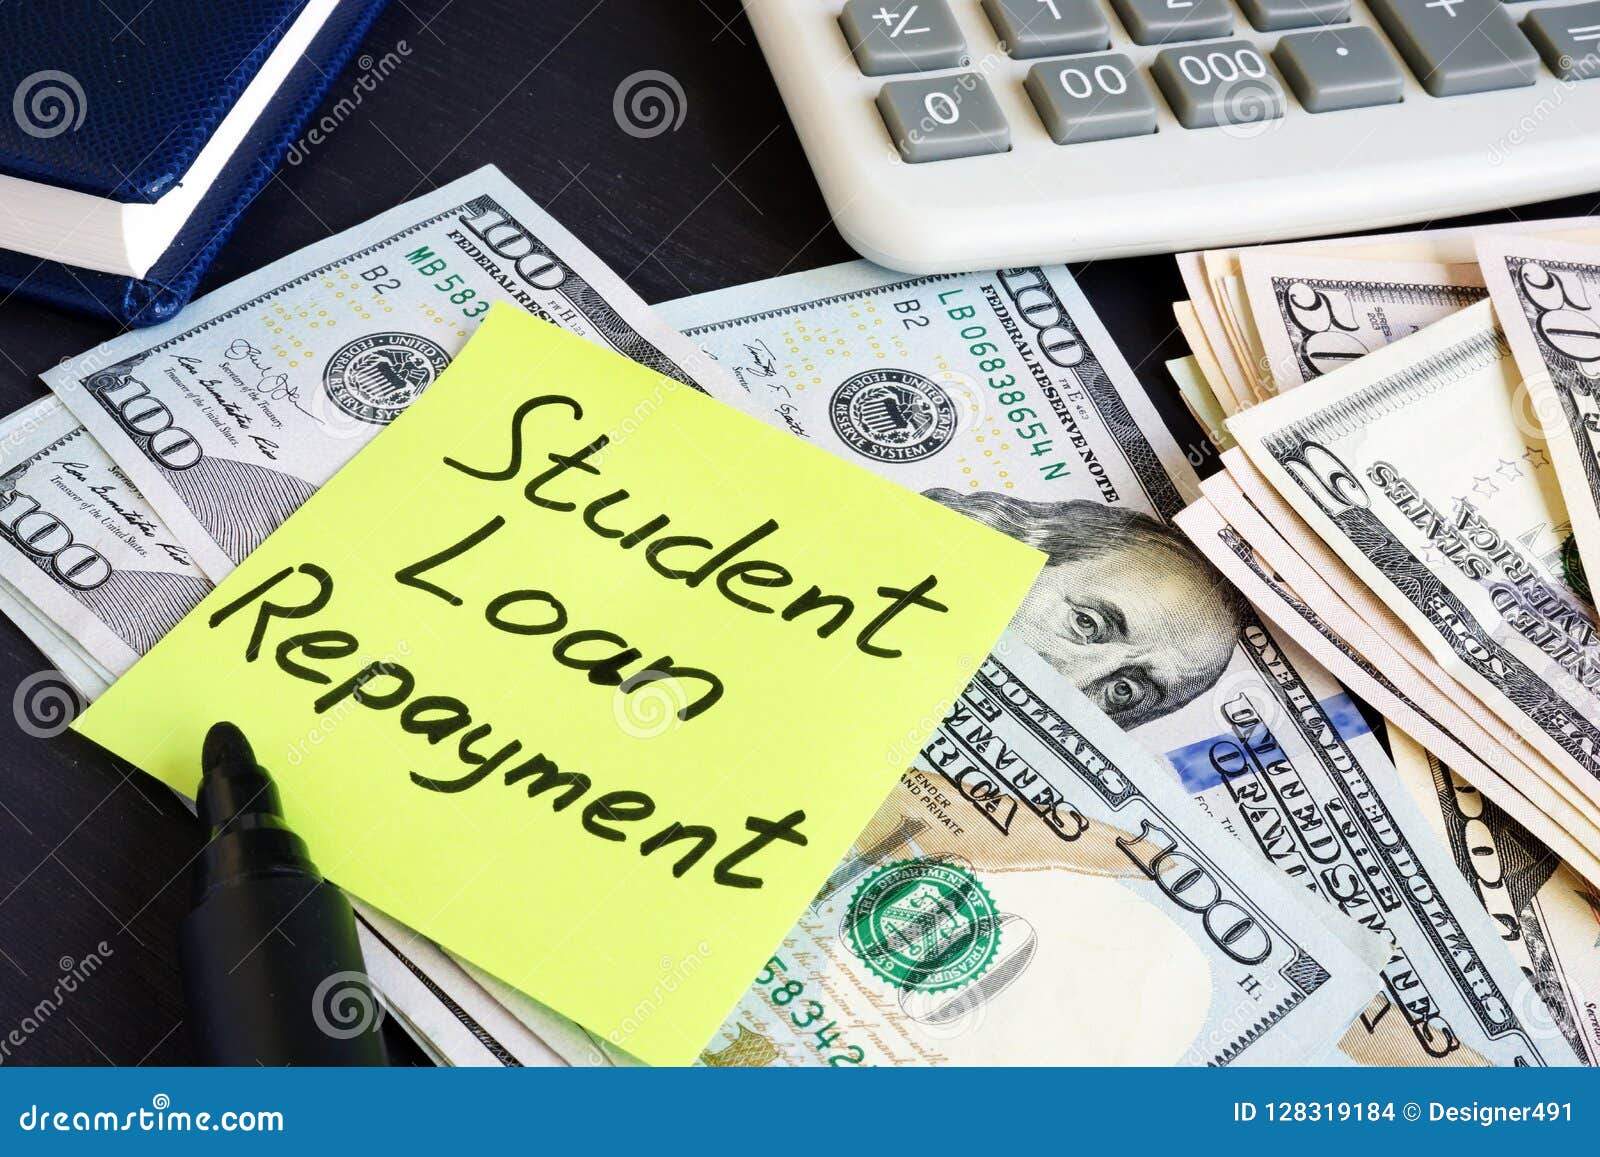 money-for-student-loan-repayment-on-a-table-stock-photo-image-of